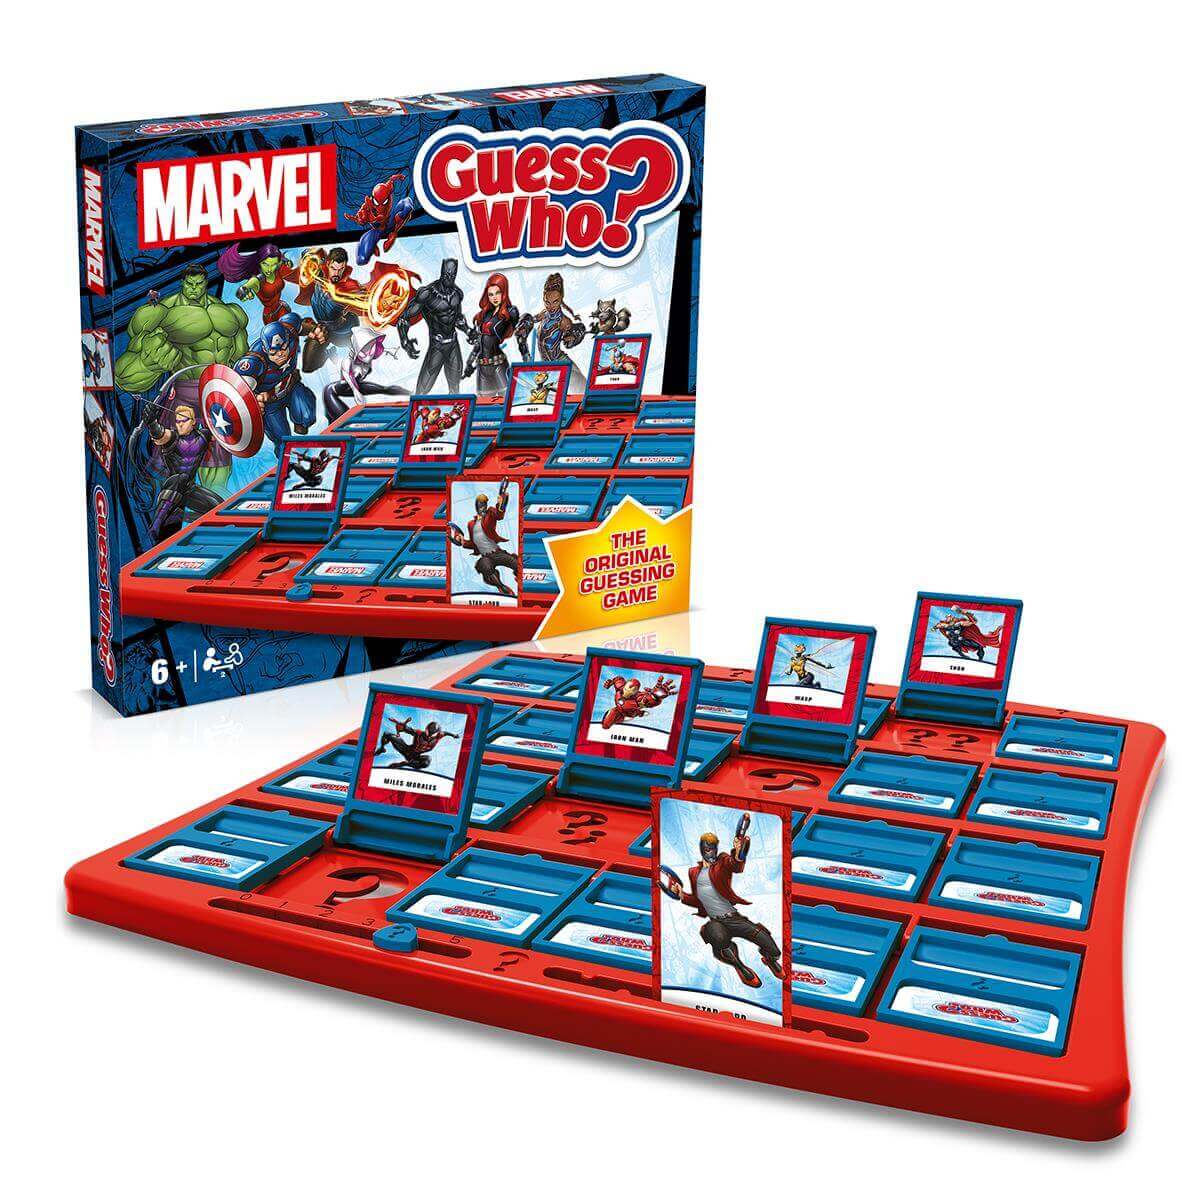 Marvel Guess Who Guessing Game